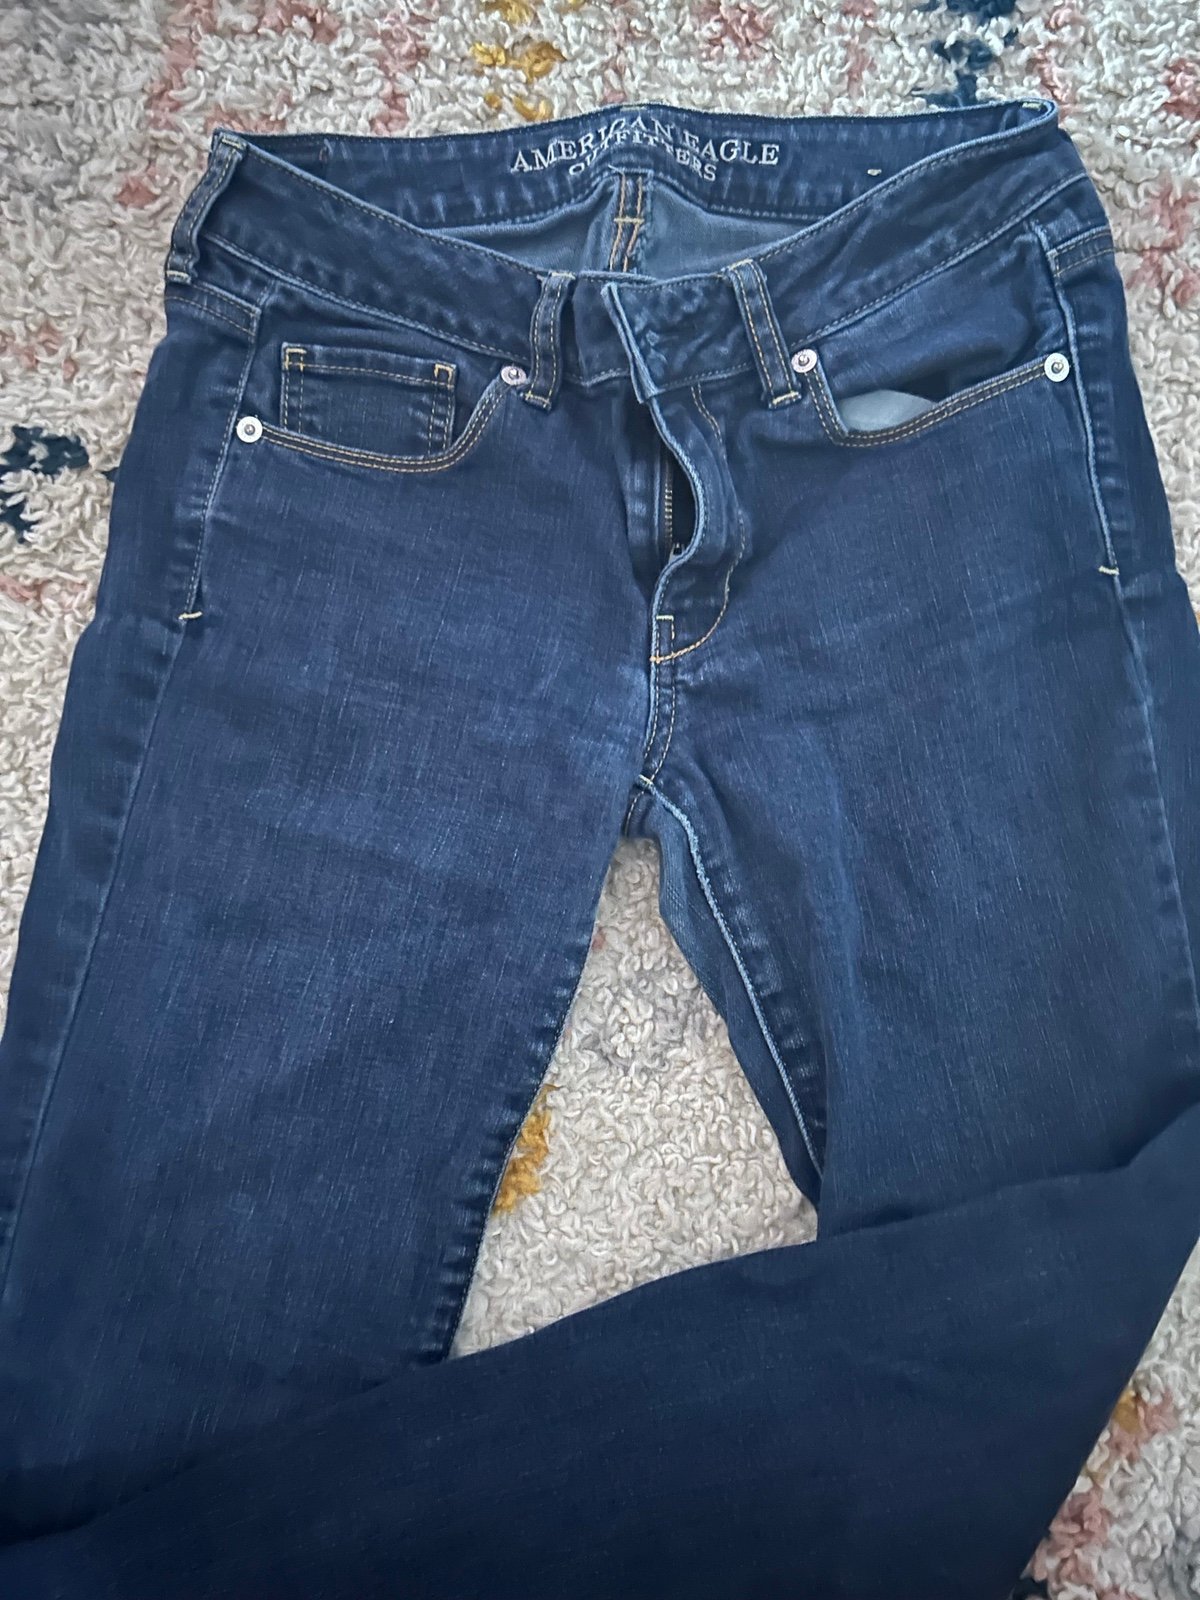 Buy American Eagle Jeans LrxapbJOq just buy it